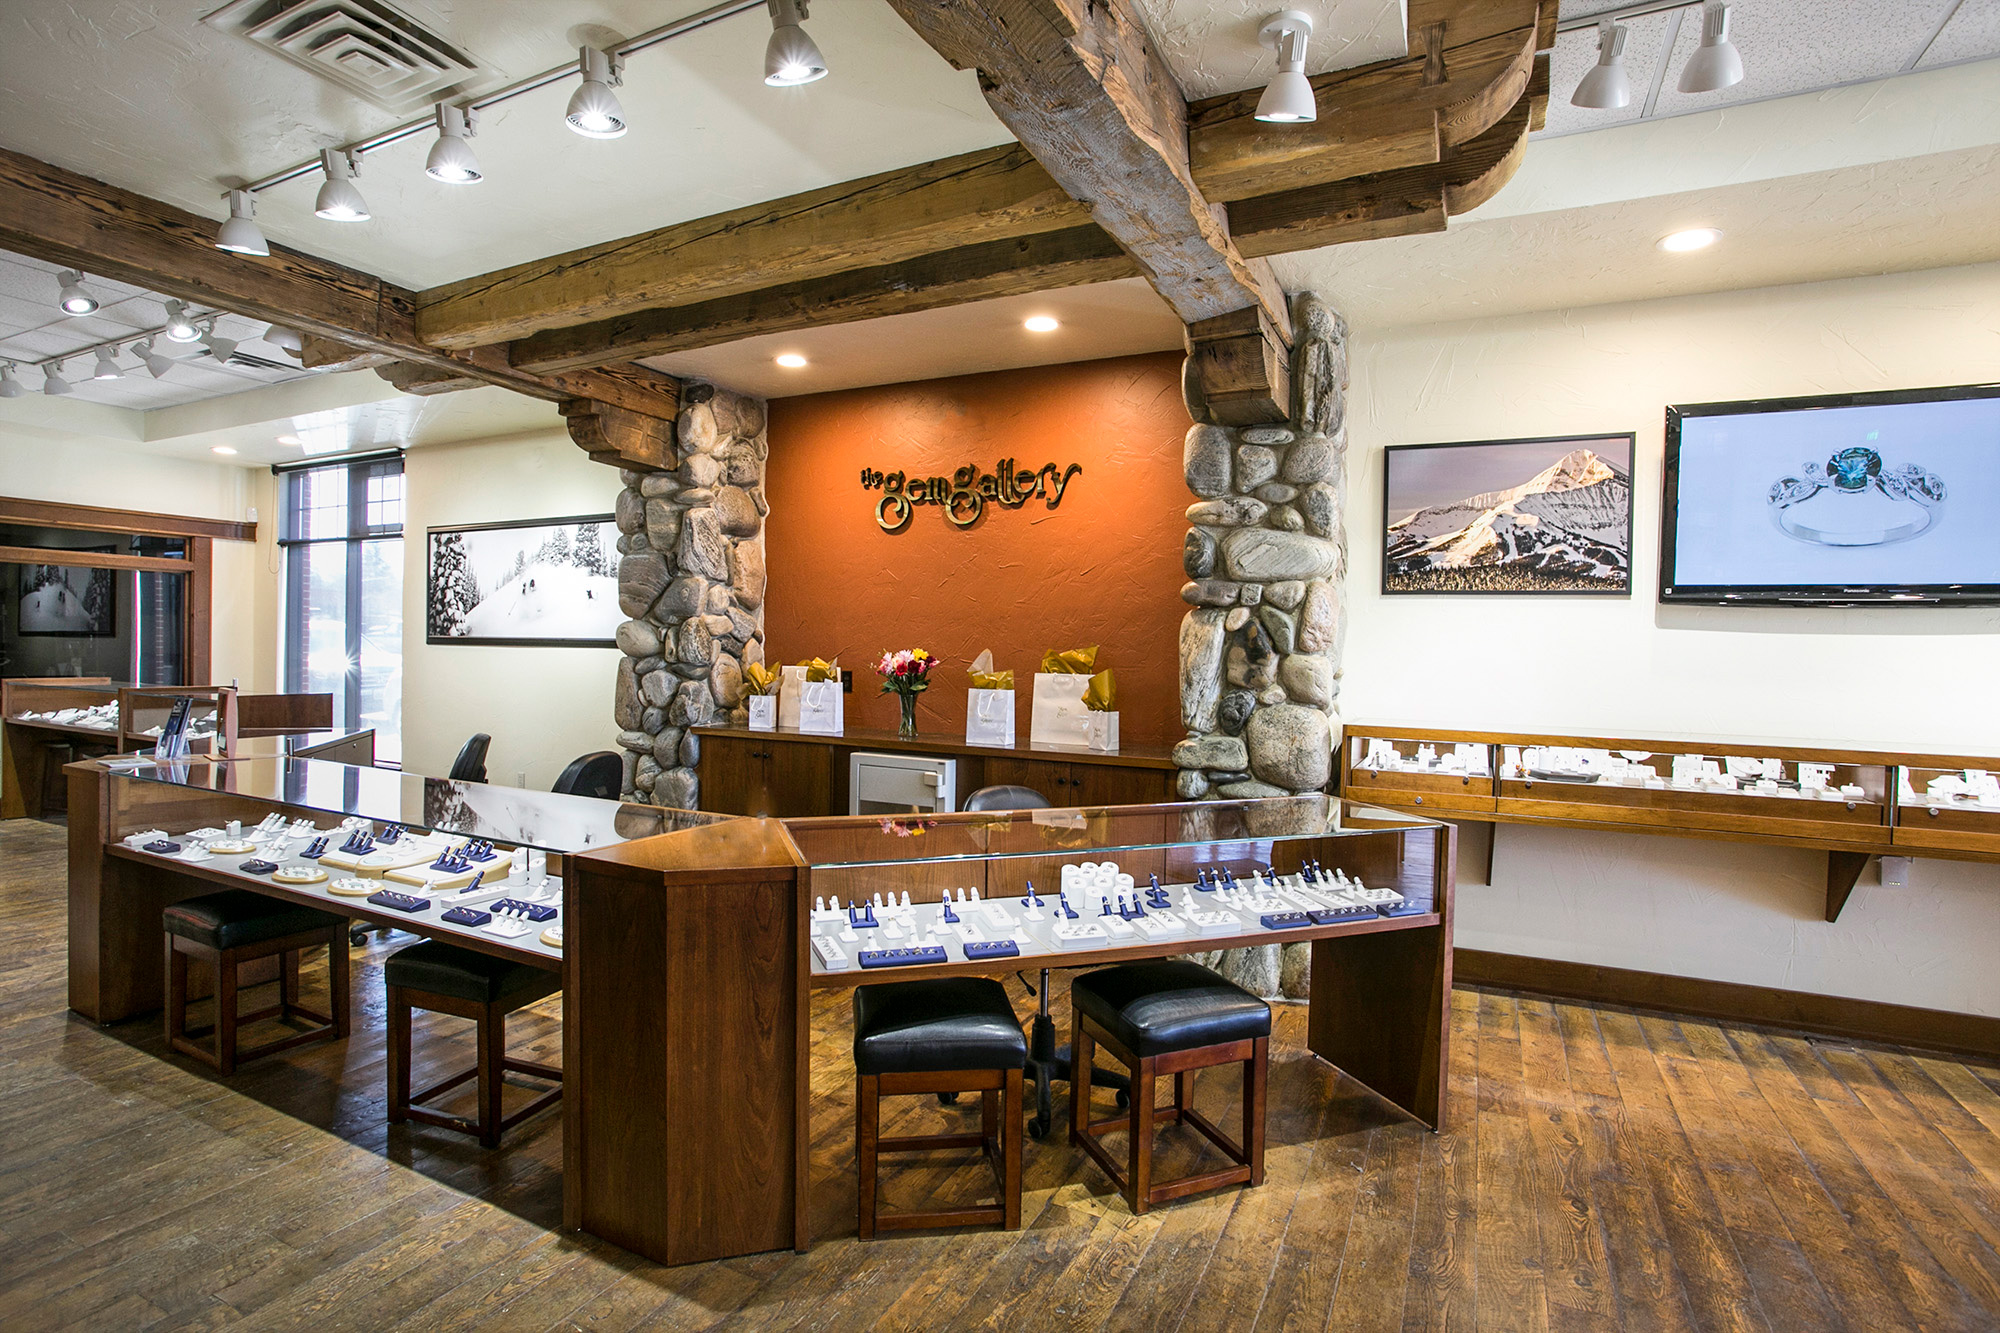 Cool Store: The Gem Gallery